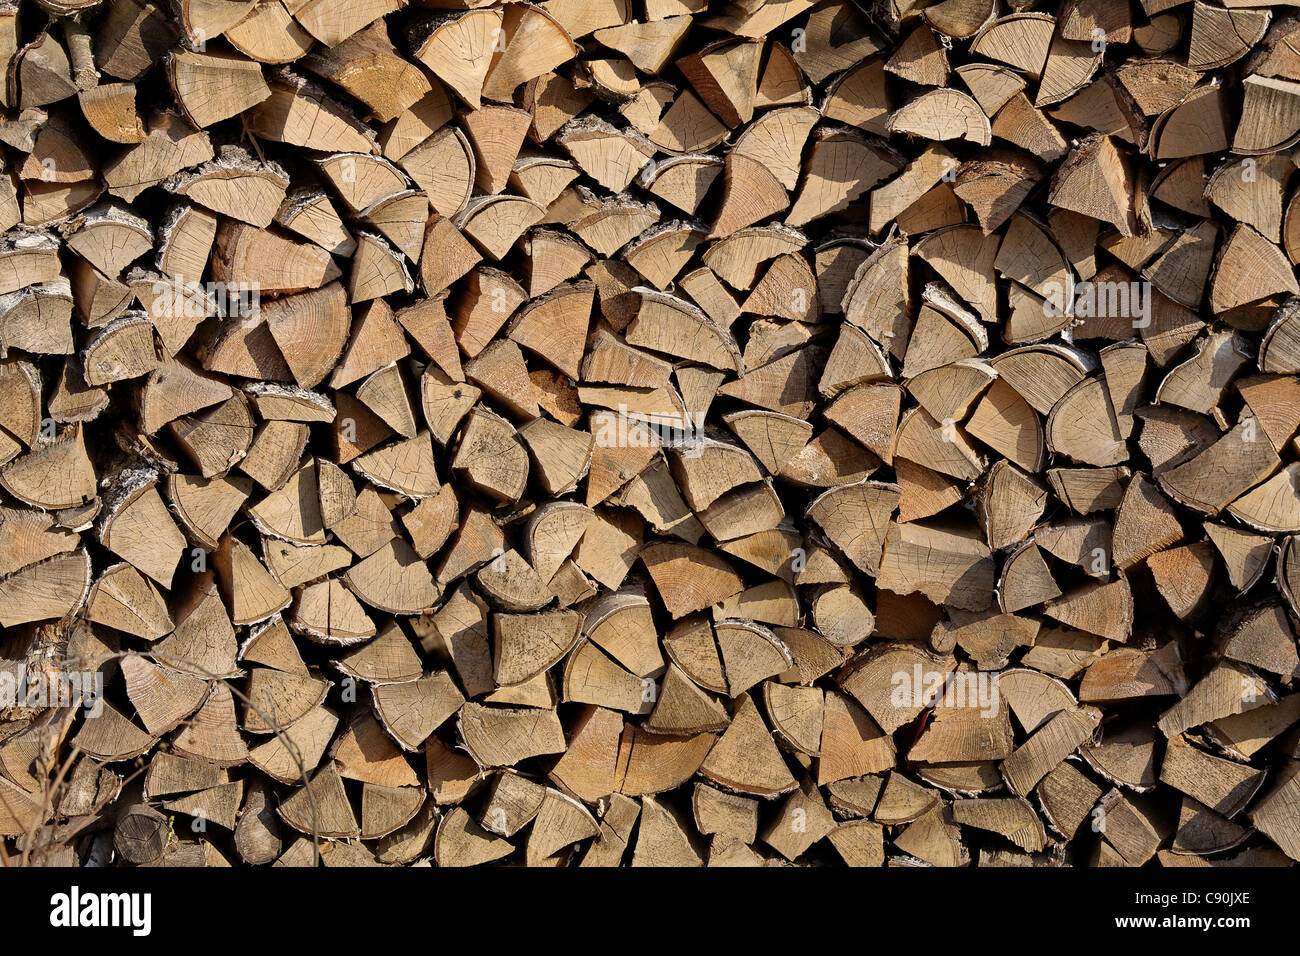 Birch firewood stacked outside. Horizontal composition. Stock Photo